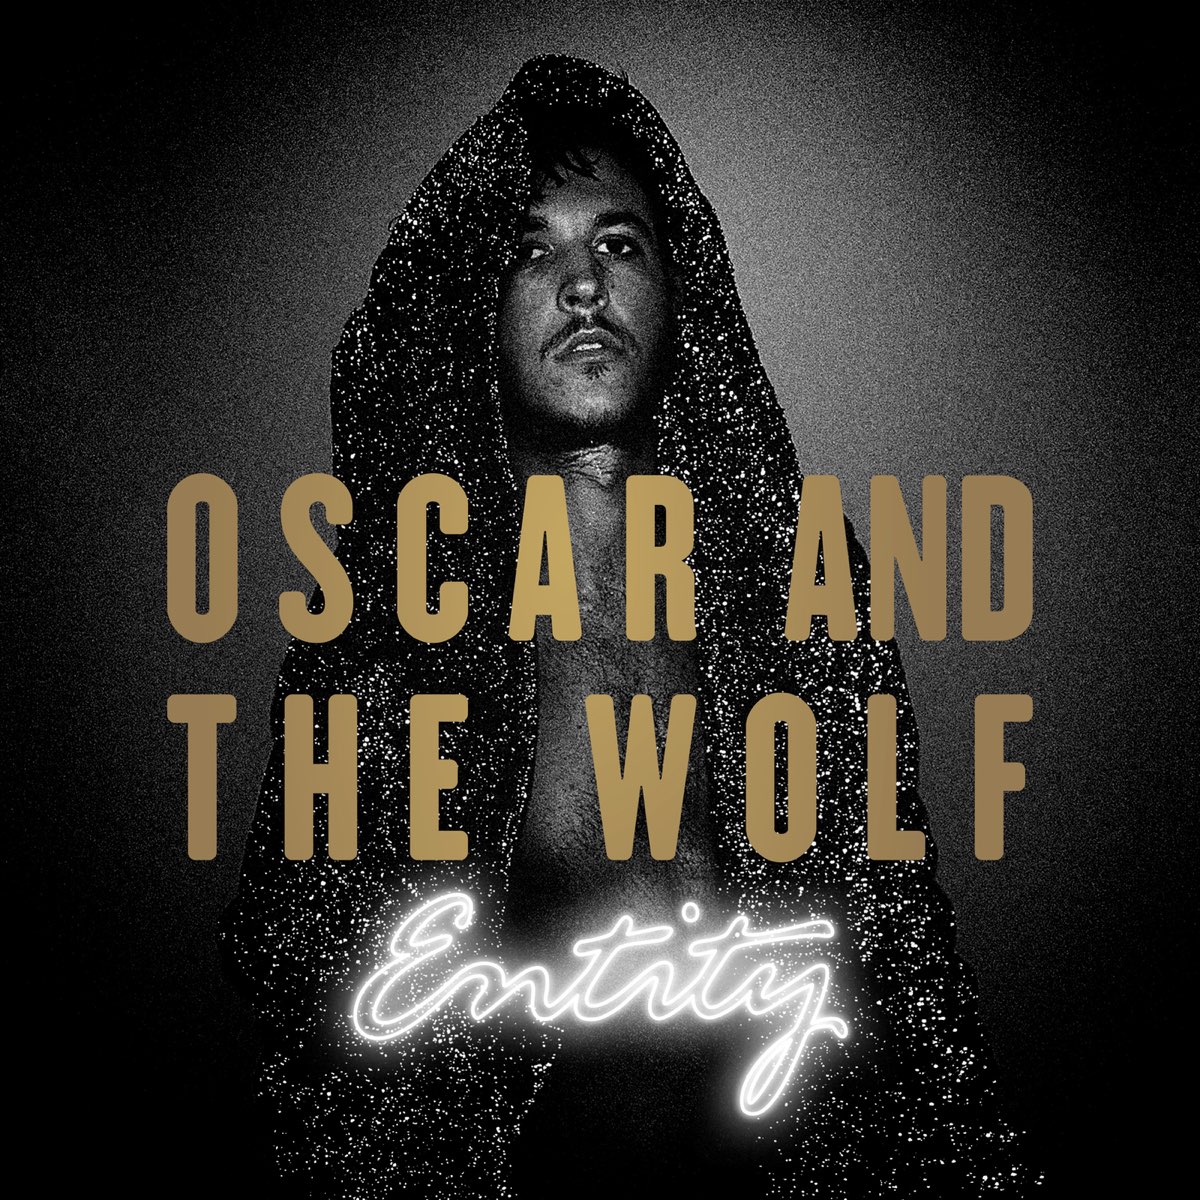 Raving george oscar wolf. You're mine Raving George feat. Oscar the Wolf. Back to Black Oscar and the Wolf. You're mine (DJ Antonio & Astero Remix) Oscar and the Wolf & Raving George. Back to Black Oscar and the Wolf шрифт.